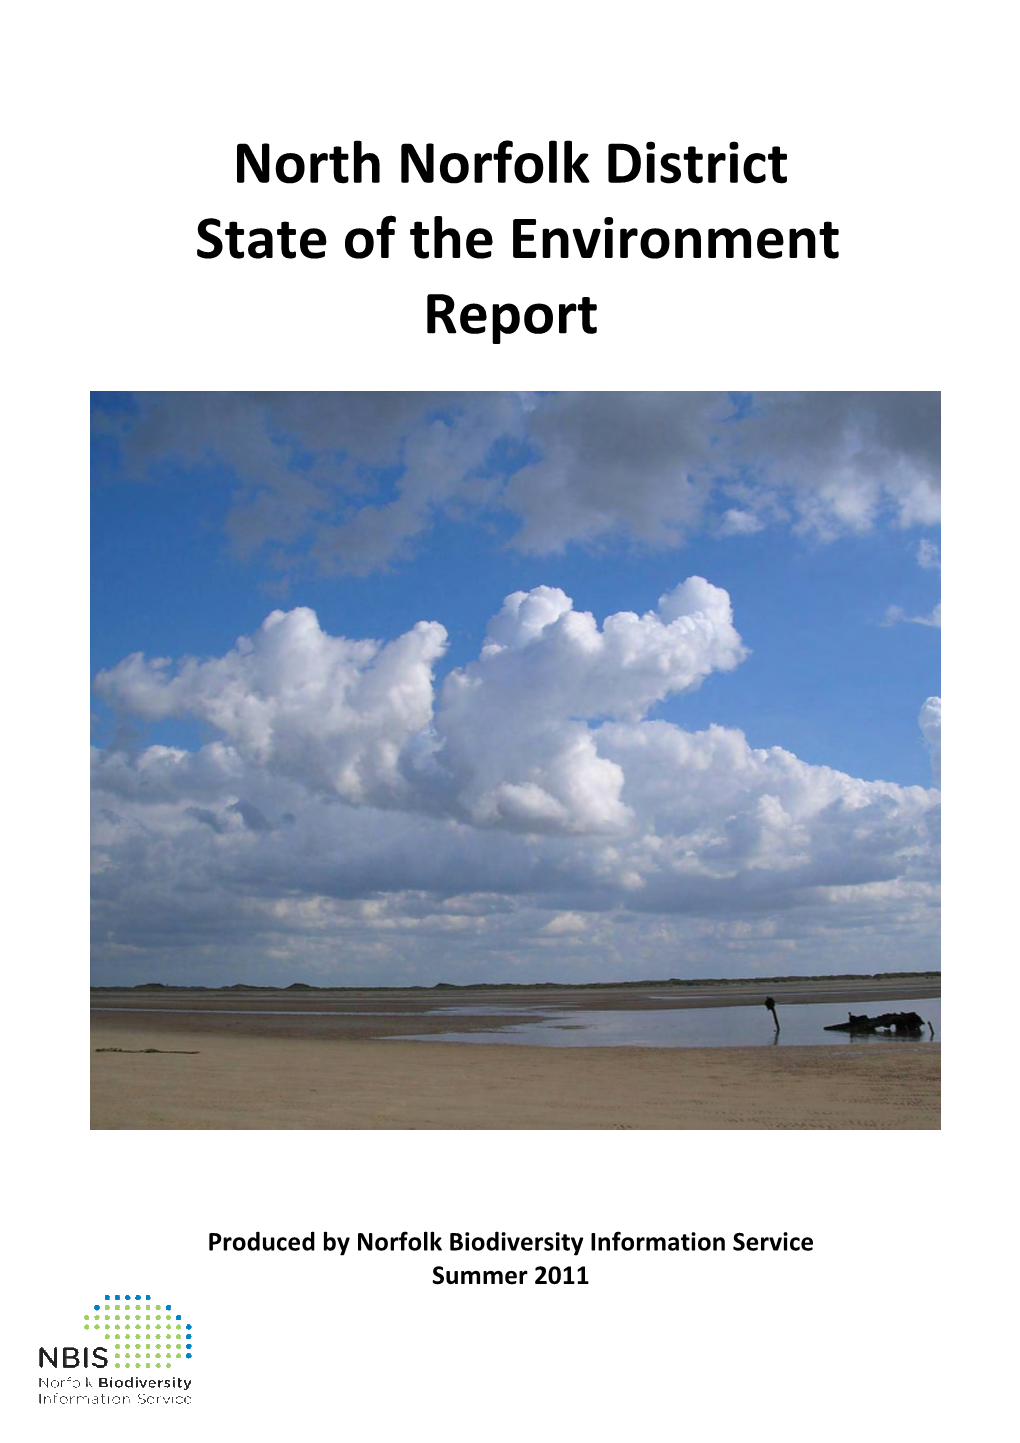 North Norfolk District State of the Environment Report